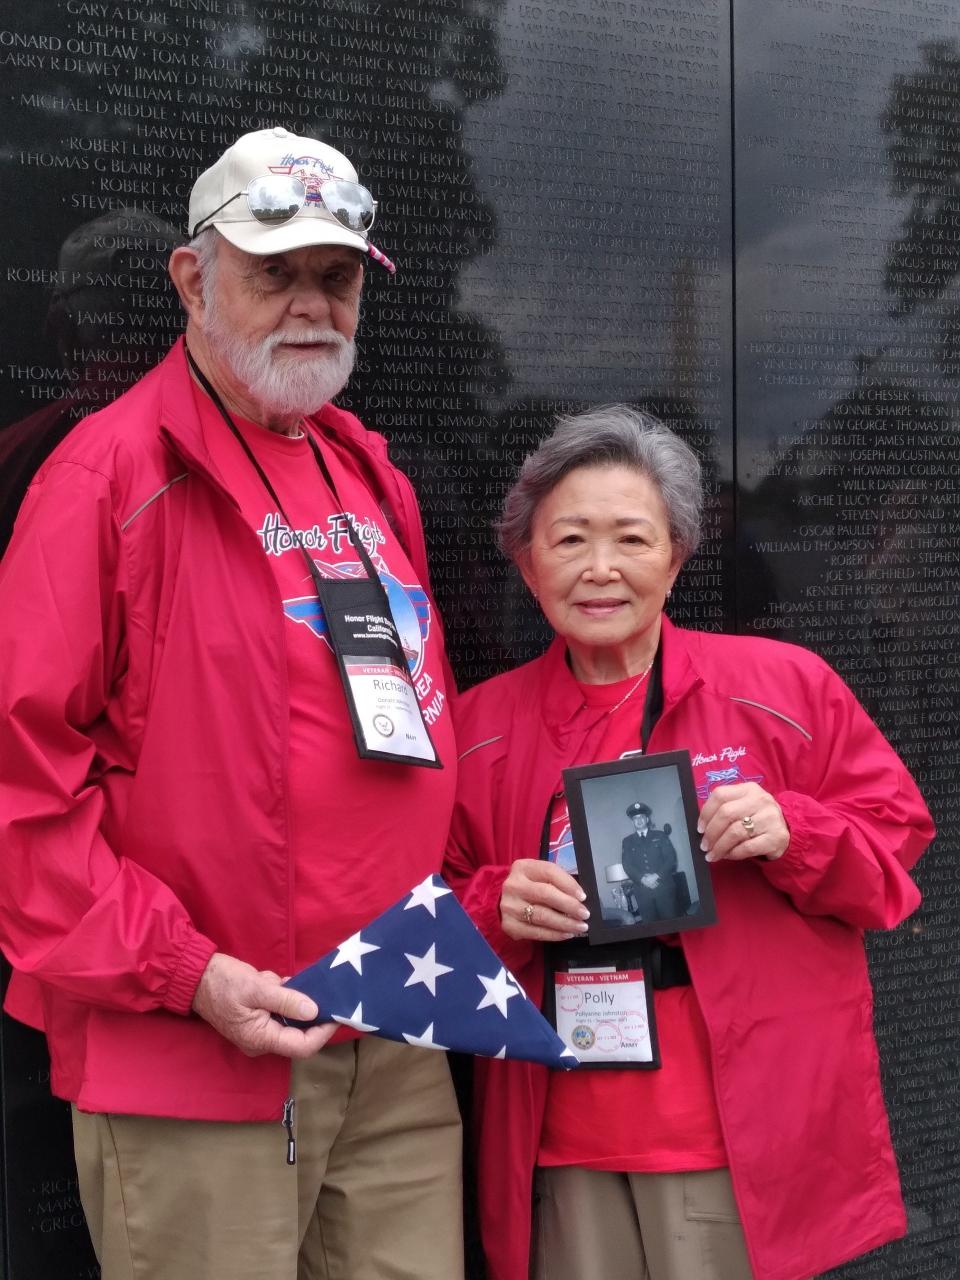 Richard and Pollyanne honor her former husband and father of her daughters Burton E. Gray, during their trip. He served in the Air Force and lived in Stockton after he served. He passed away in 2006.